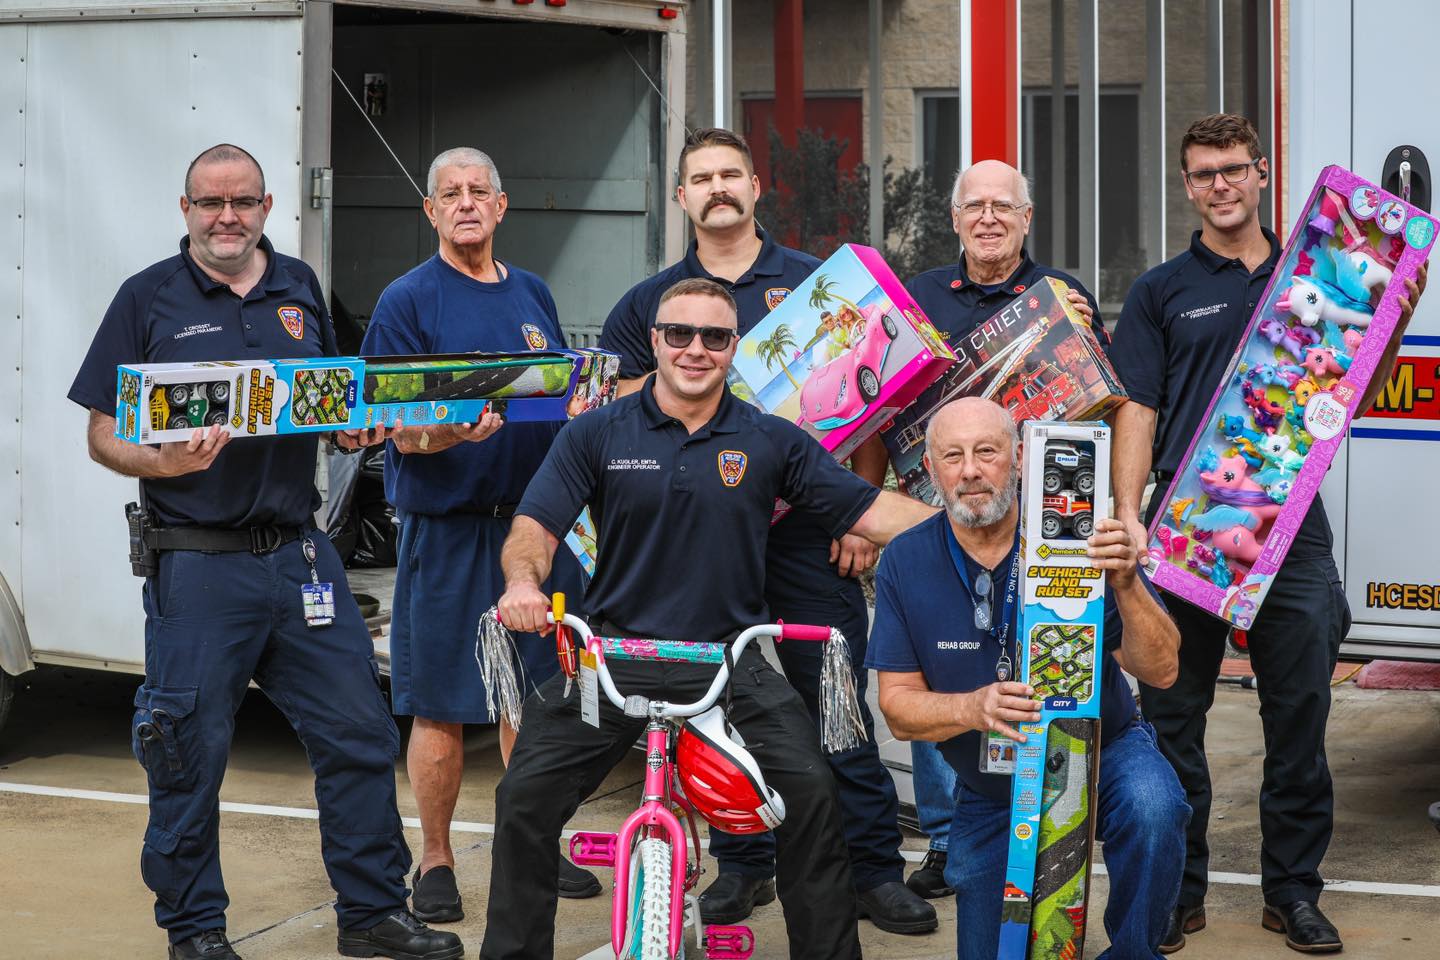 Katy Area Fire Departments Band Together for Katy Families In Need